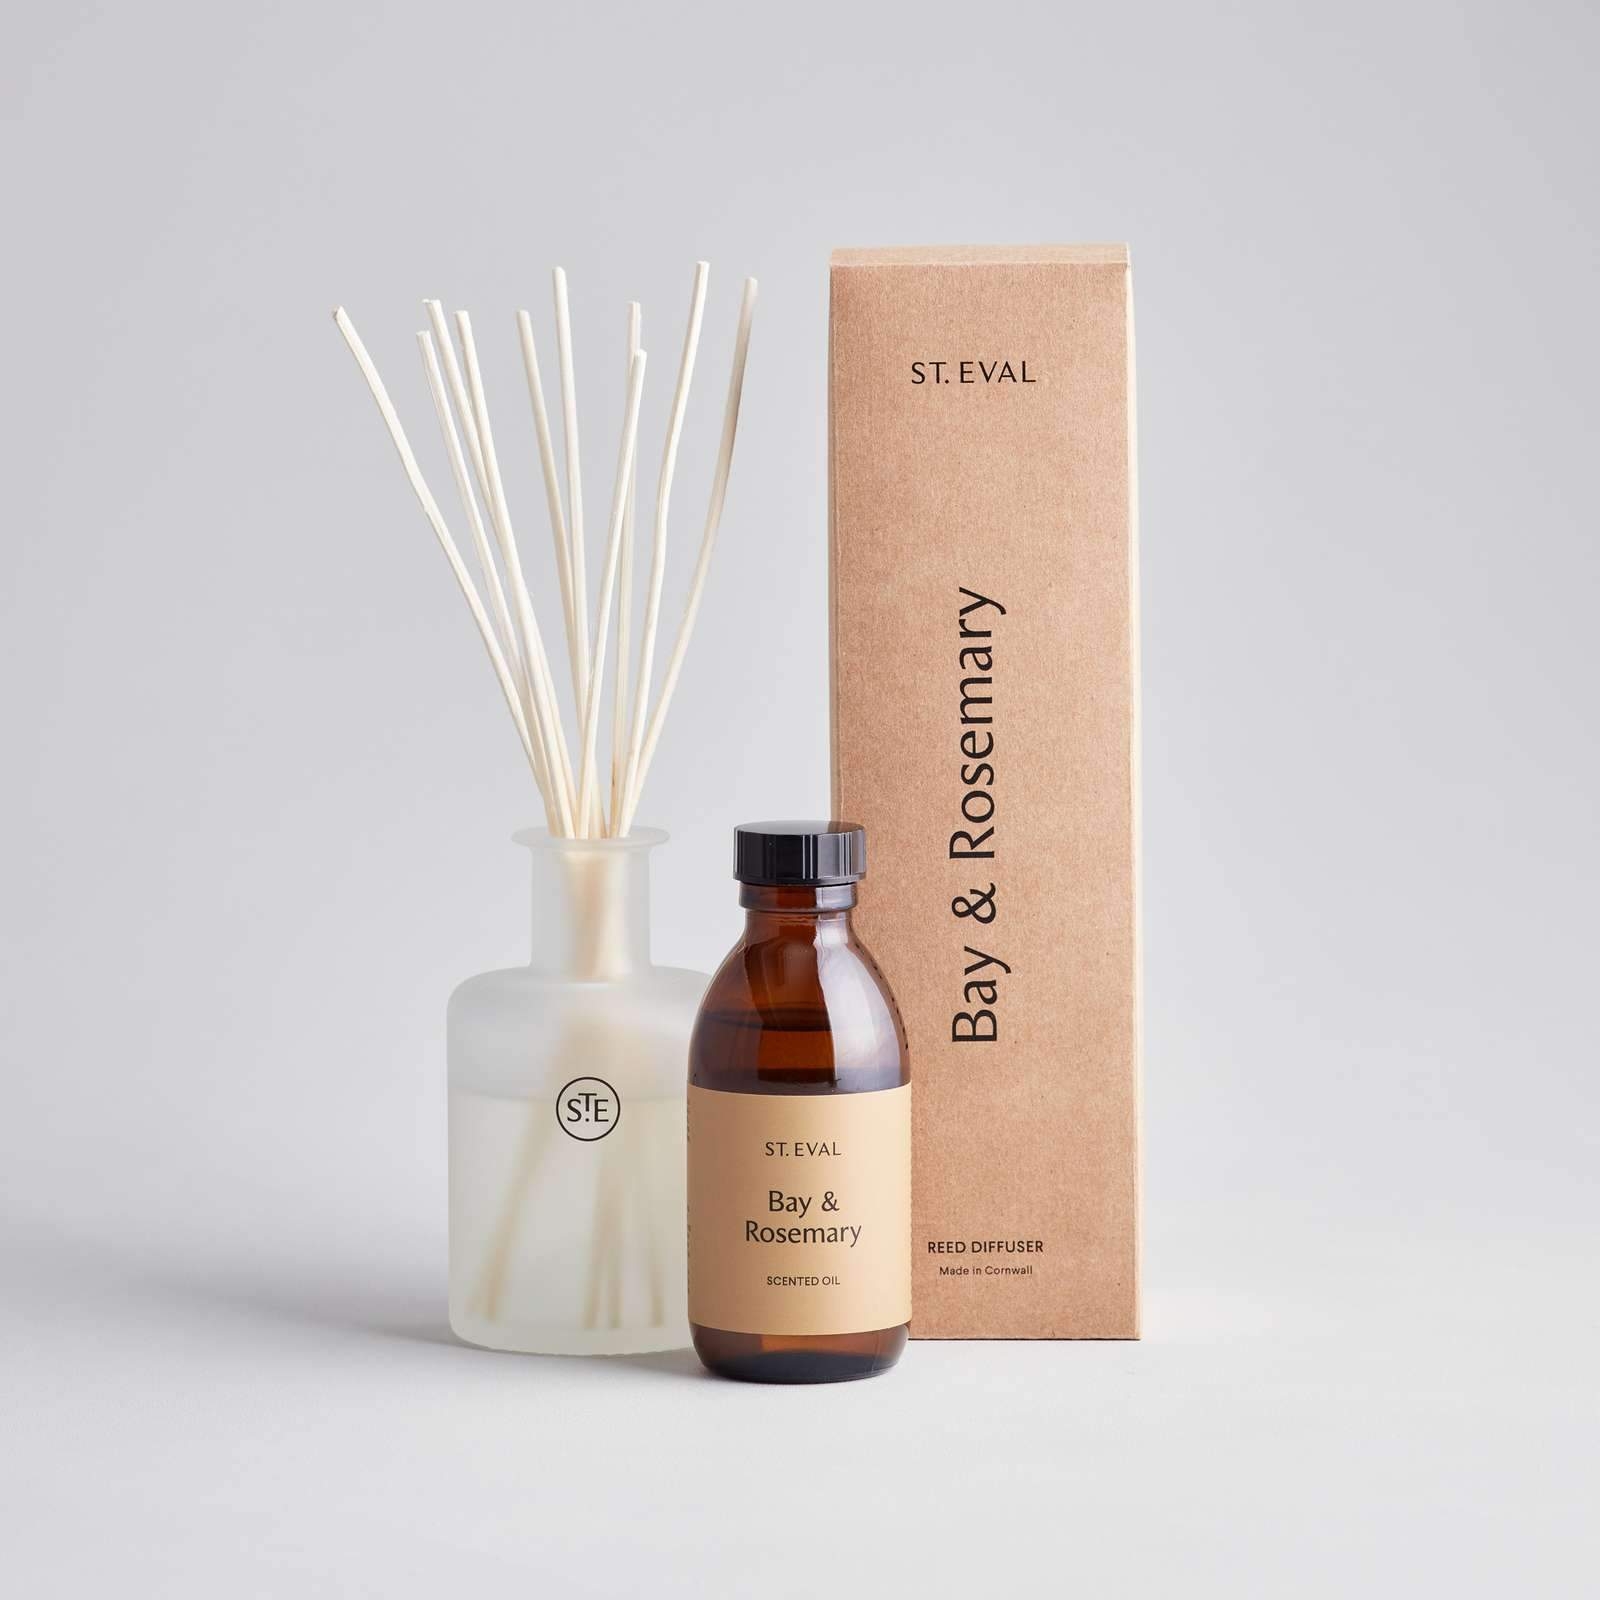 Bay & Rosemary Reed Diffuser | St. Eval – St. Eval Candle Company